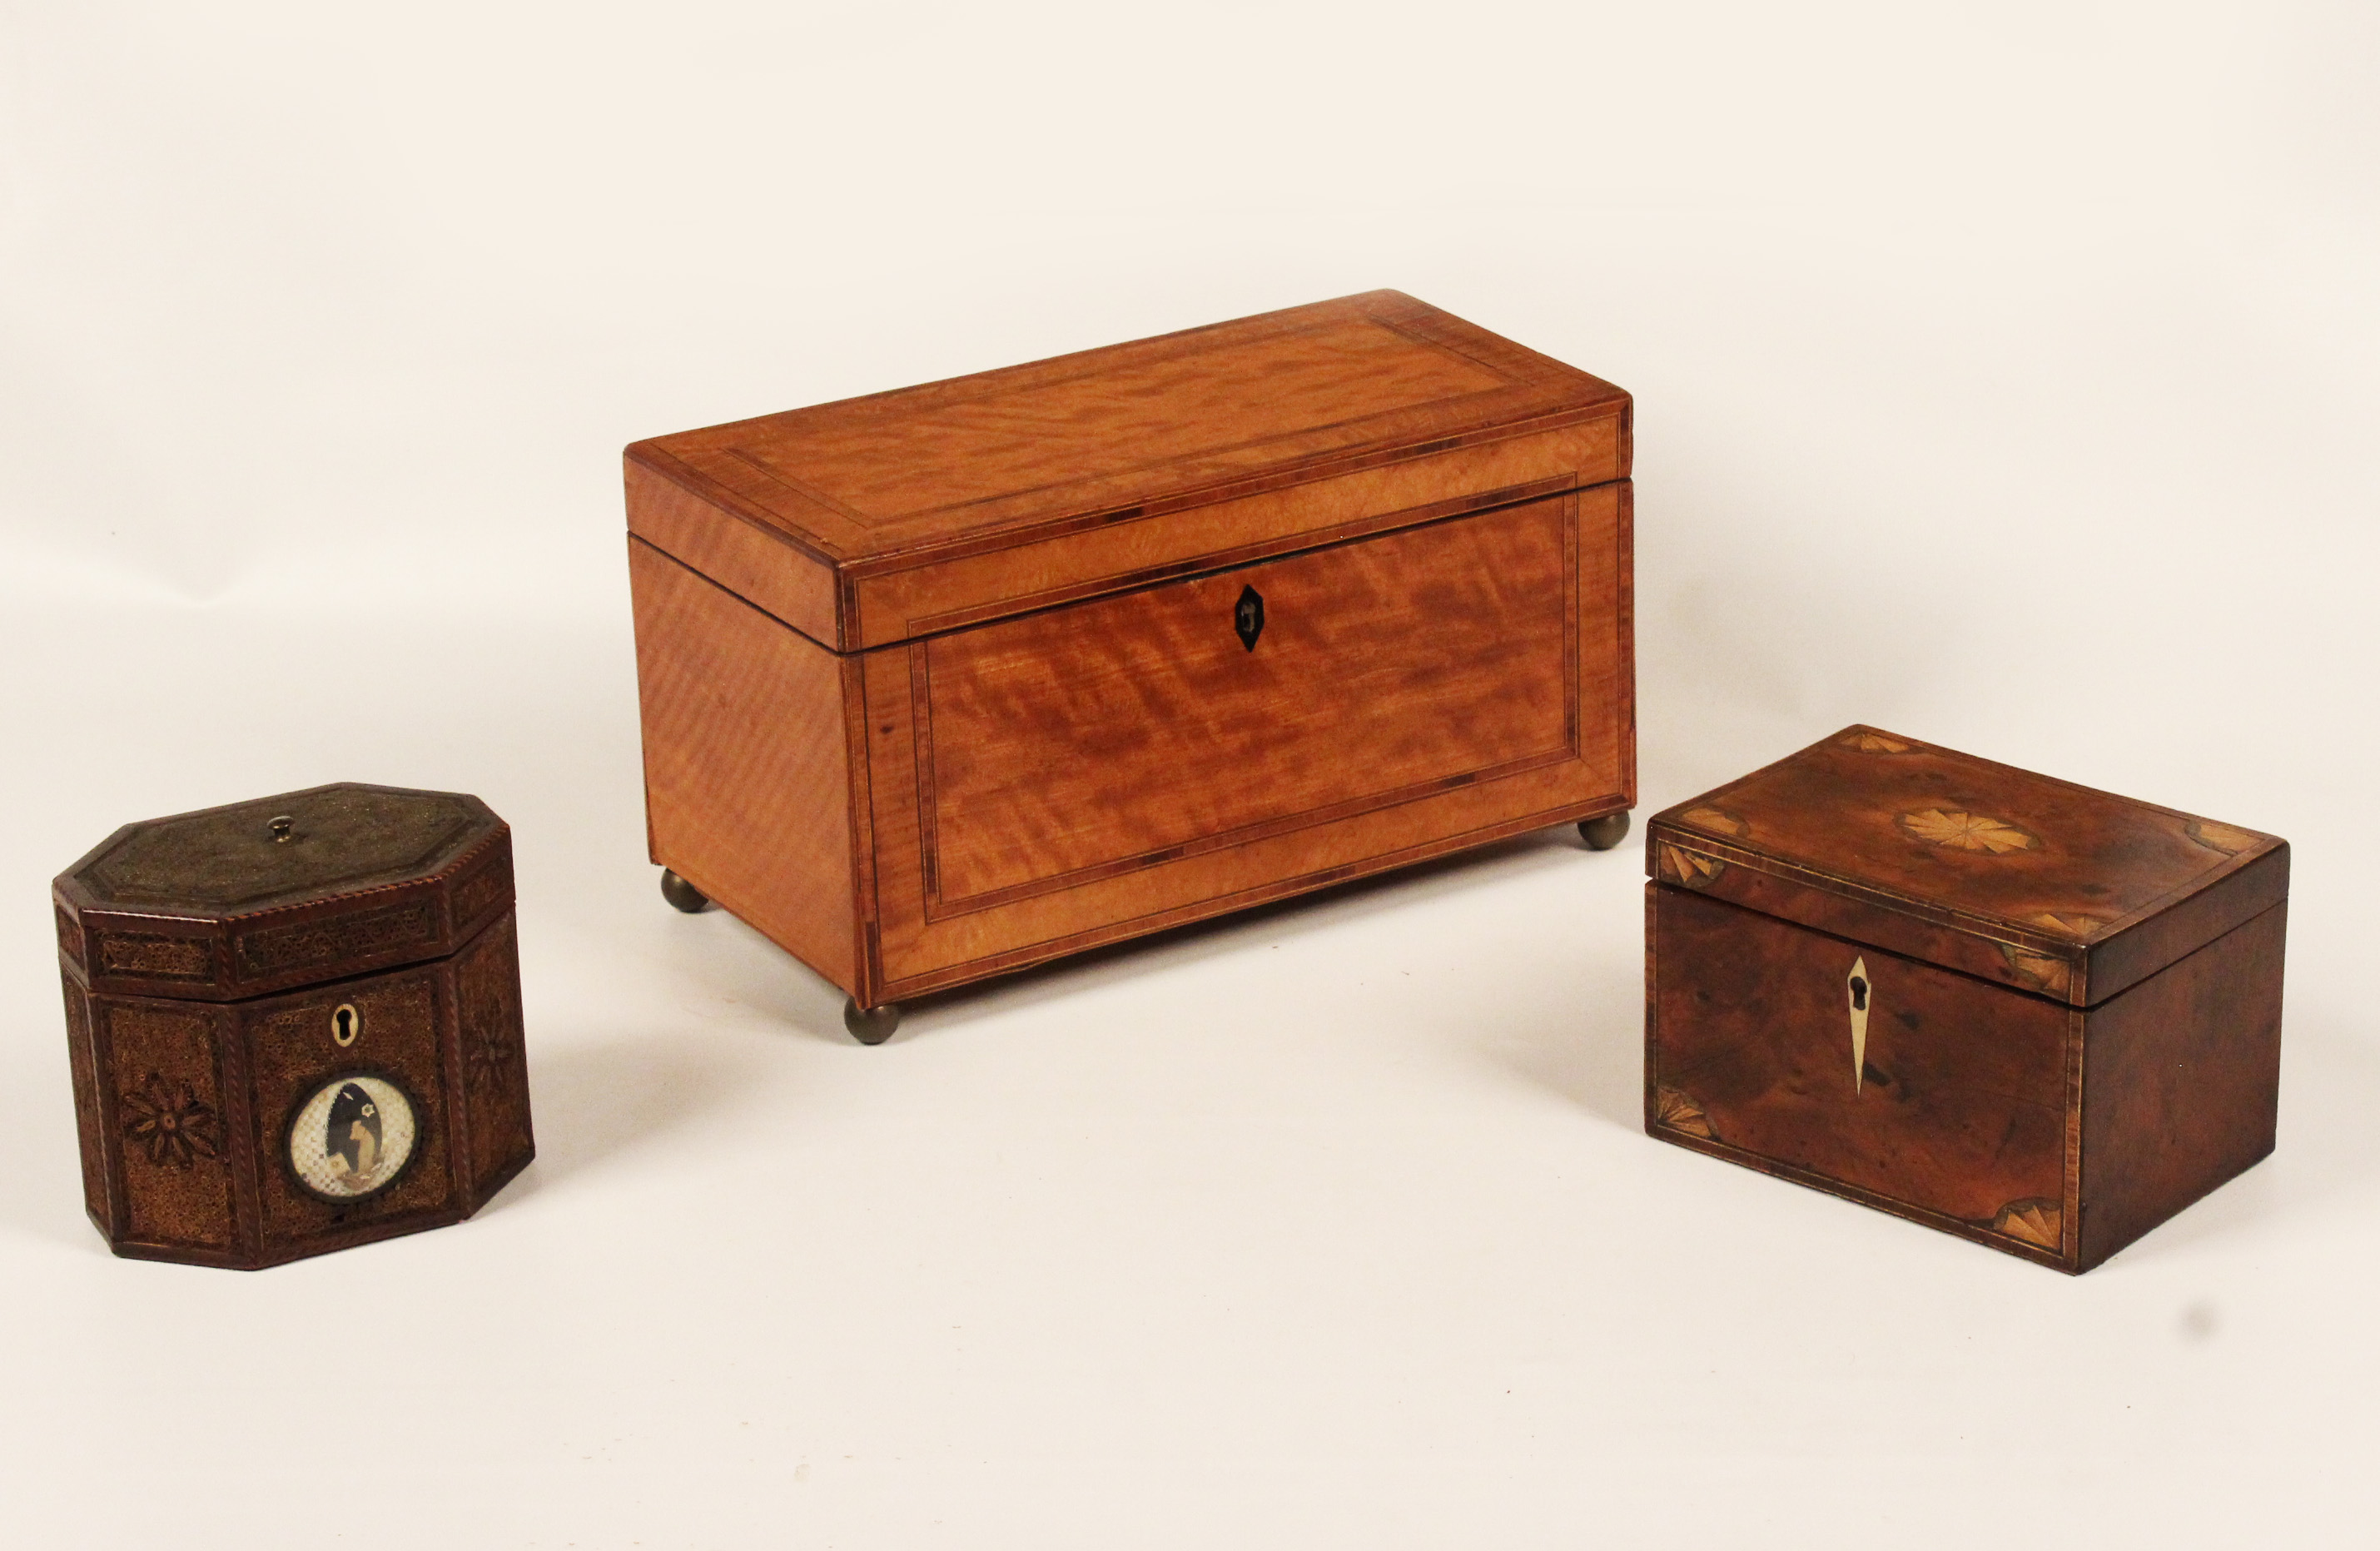 GROUP OF 3 ANTIQUE ENGLISH CADDIES